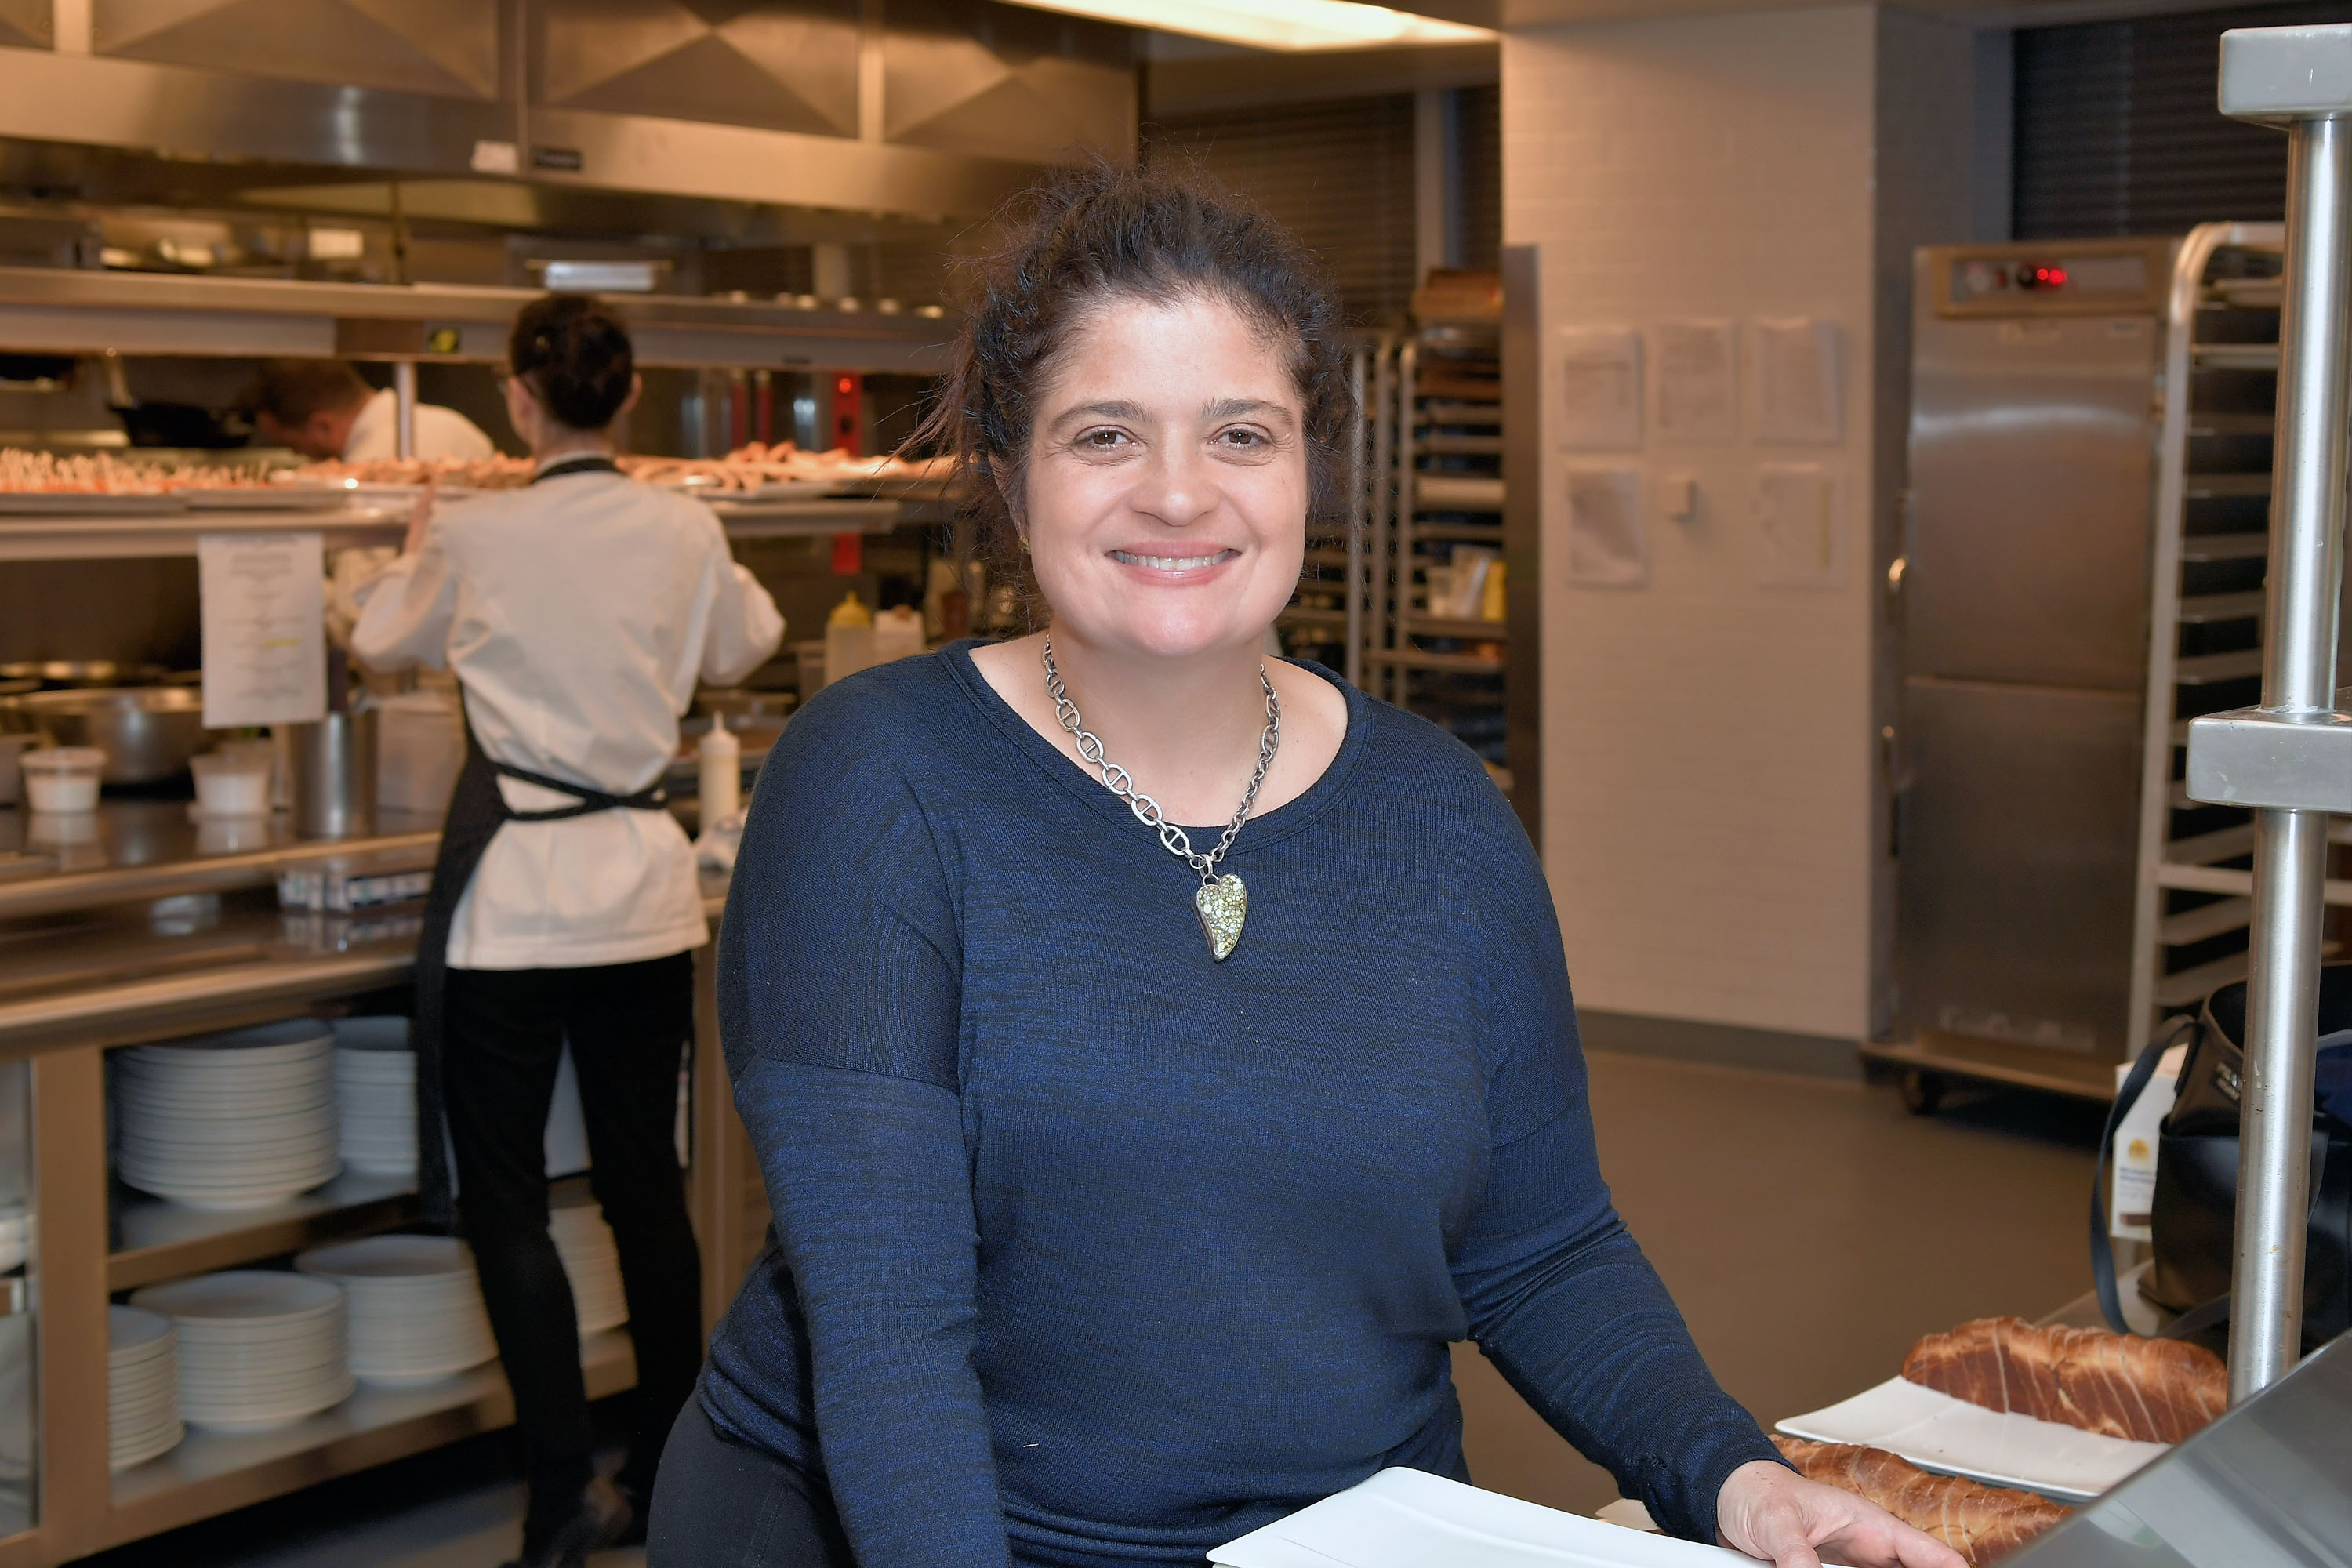 Alex Guarnaschelli wears a long-sleeved blue blouse in this photograph.